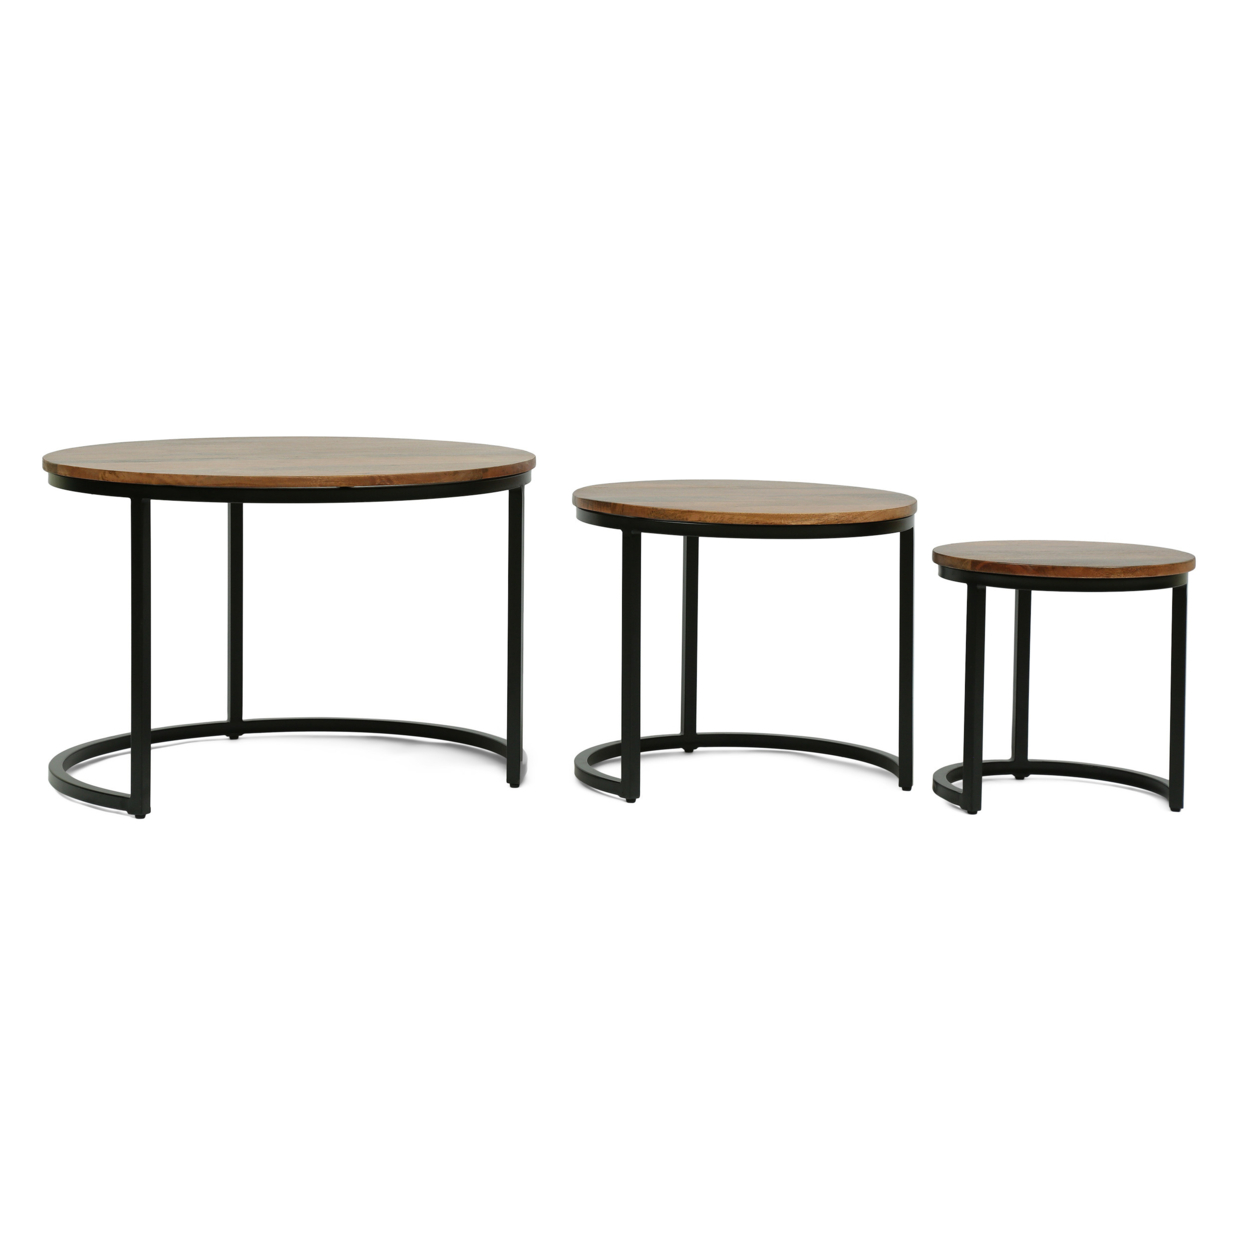 Tignall Modern Industrial Handcrafted Mango Wood Nested Tables (Set Of 3), Honey Brown And Black